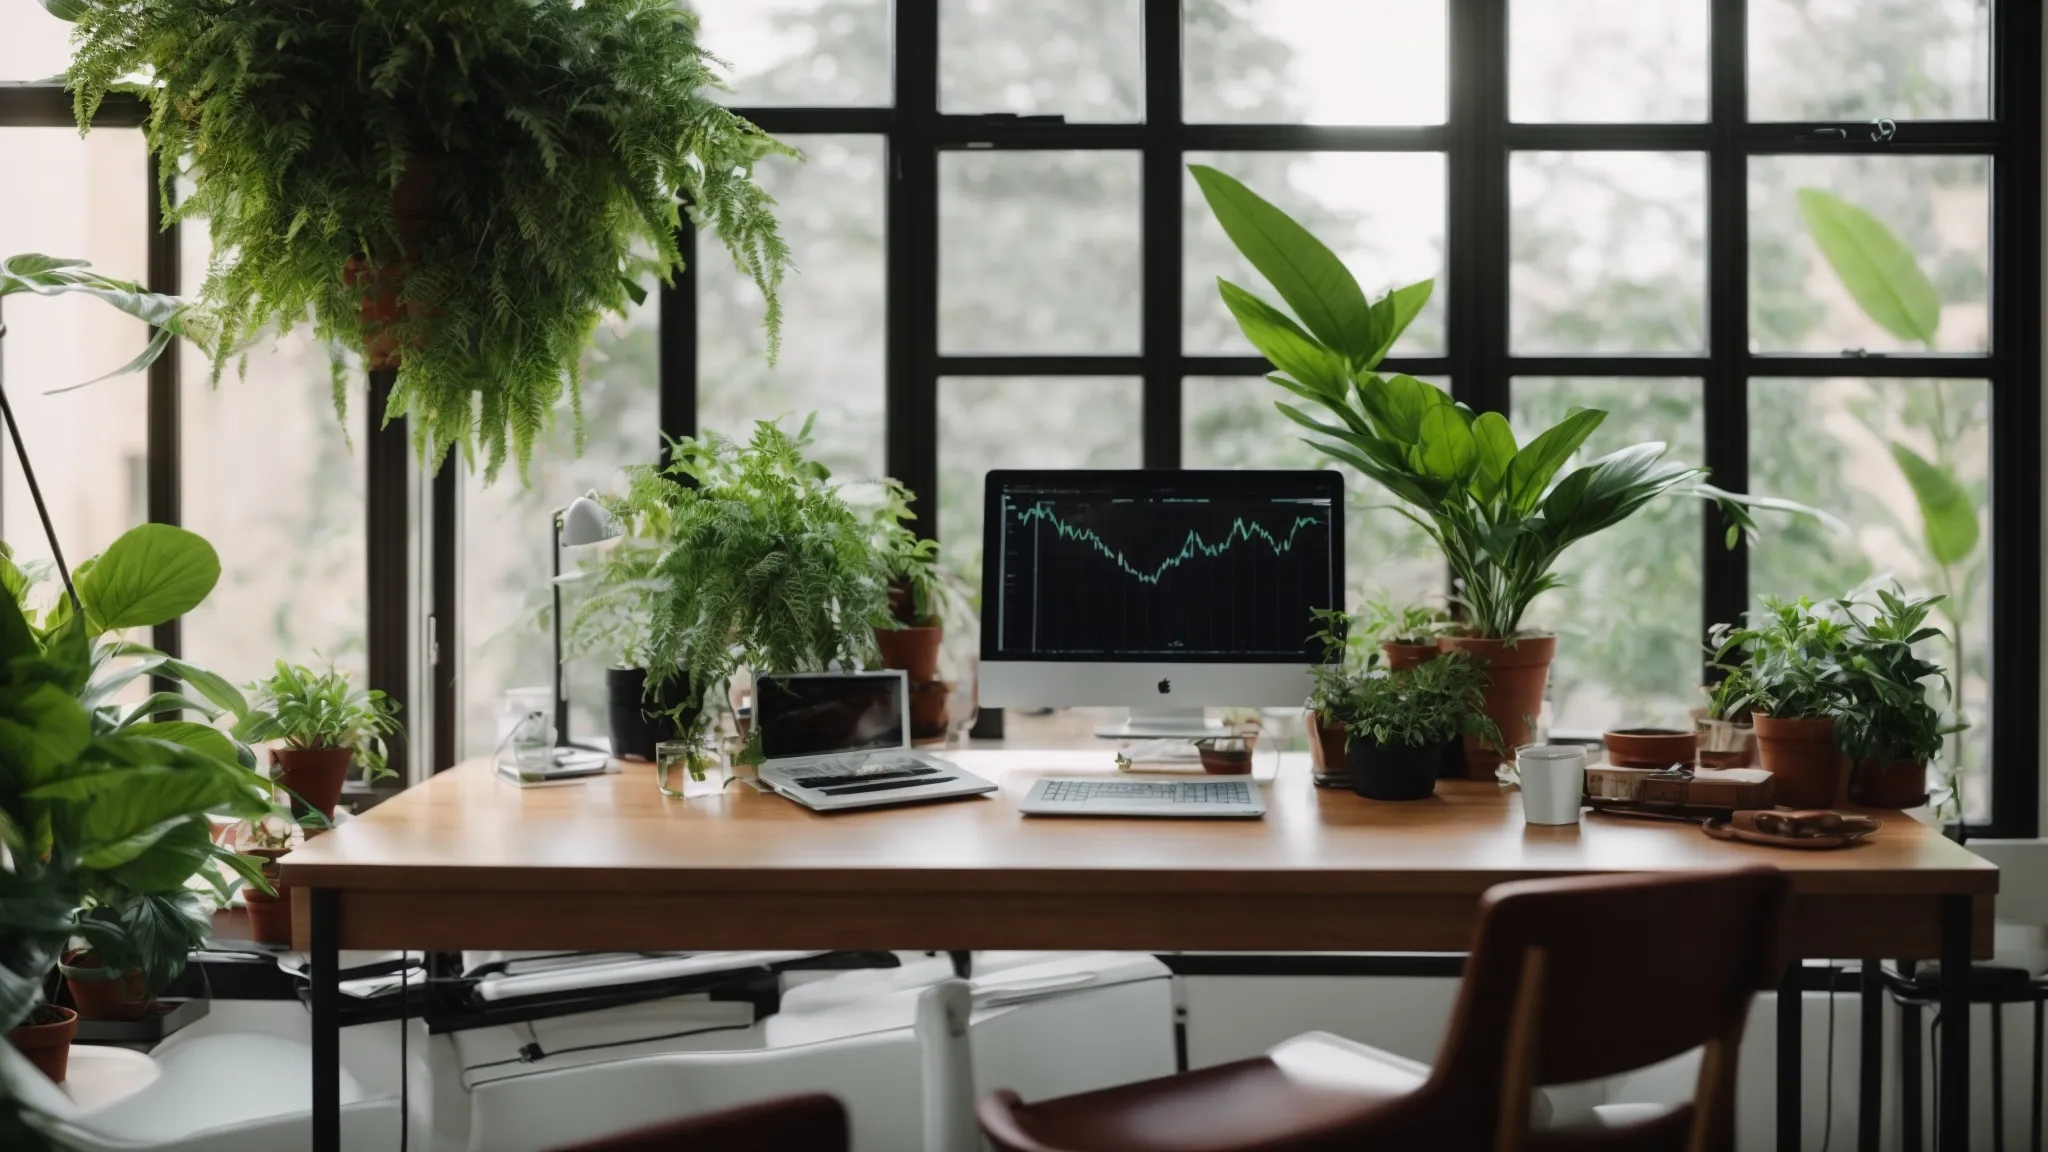 a clean workspace with an open laptop displaying vivid graphs while a plant adds a touch of greenery.